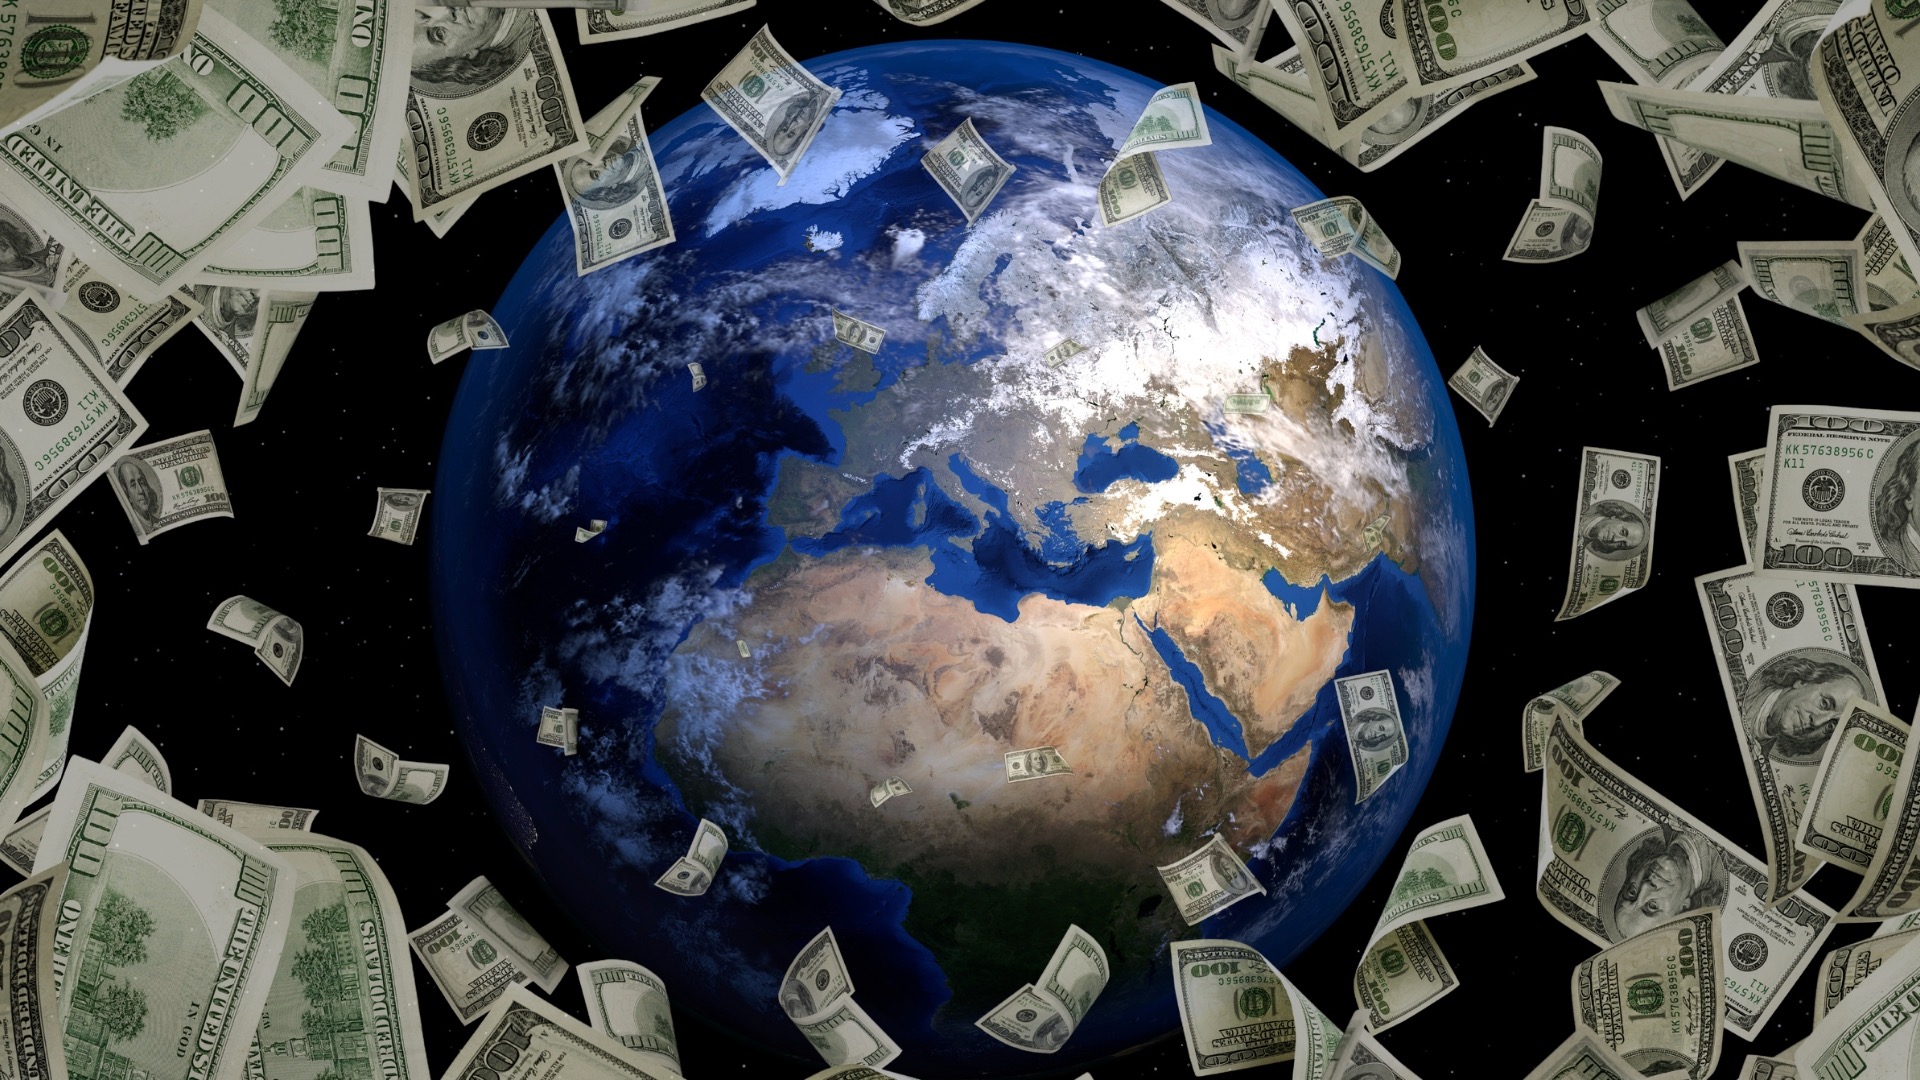 The planet Earth surrounded by money.